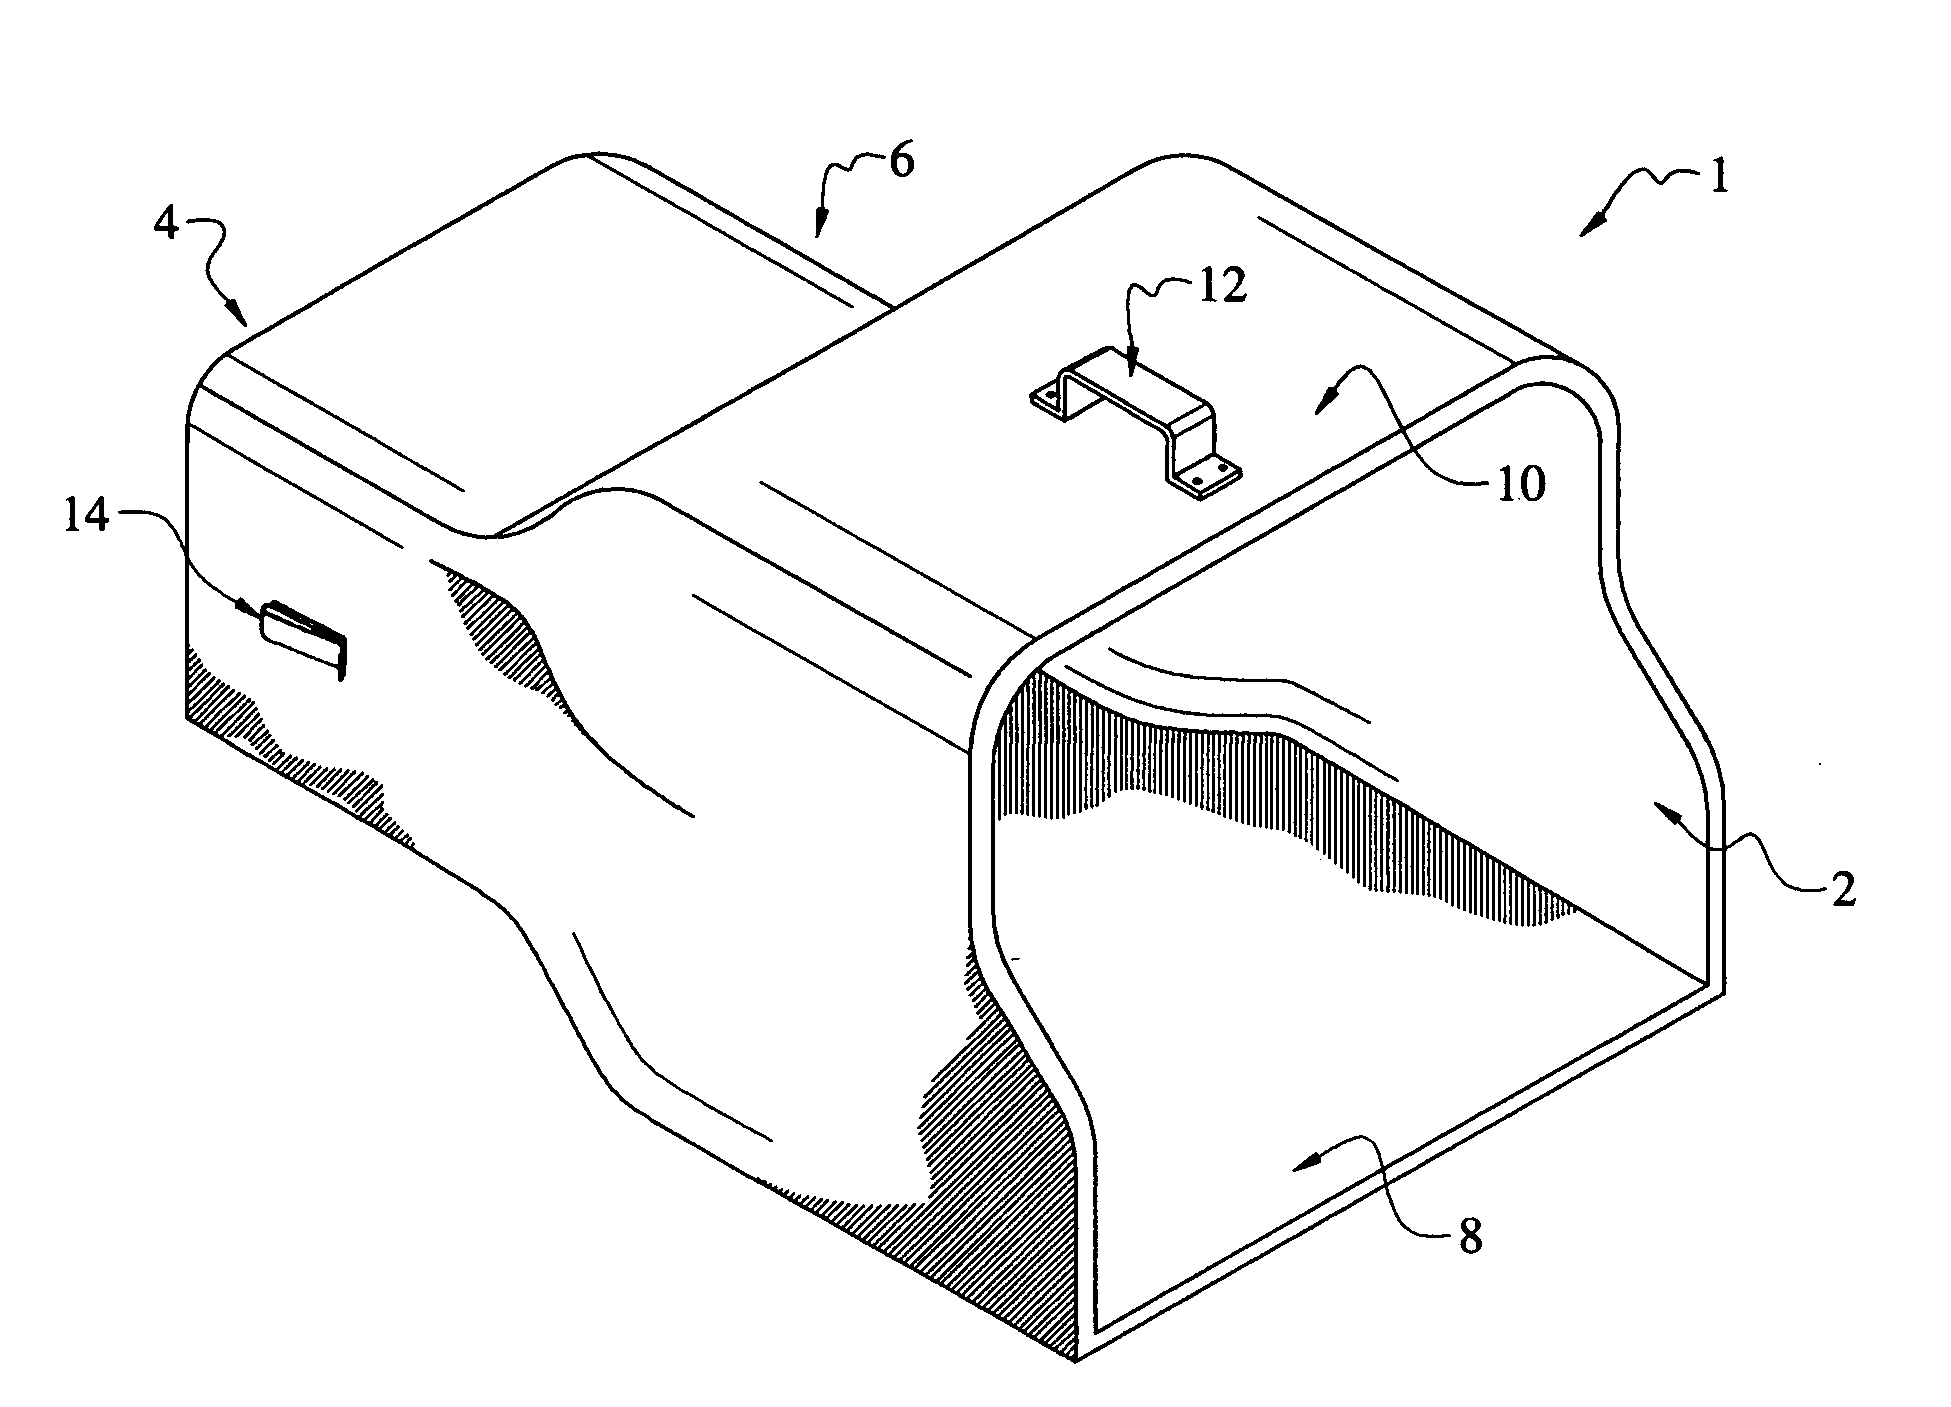 Apparatus and a method for bagging debris in a commercially available trash bag which has closure straps